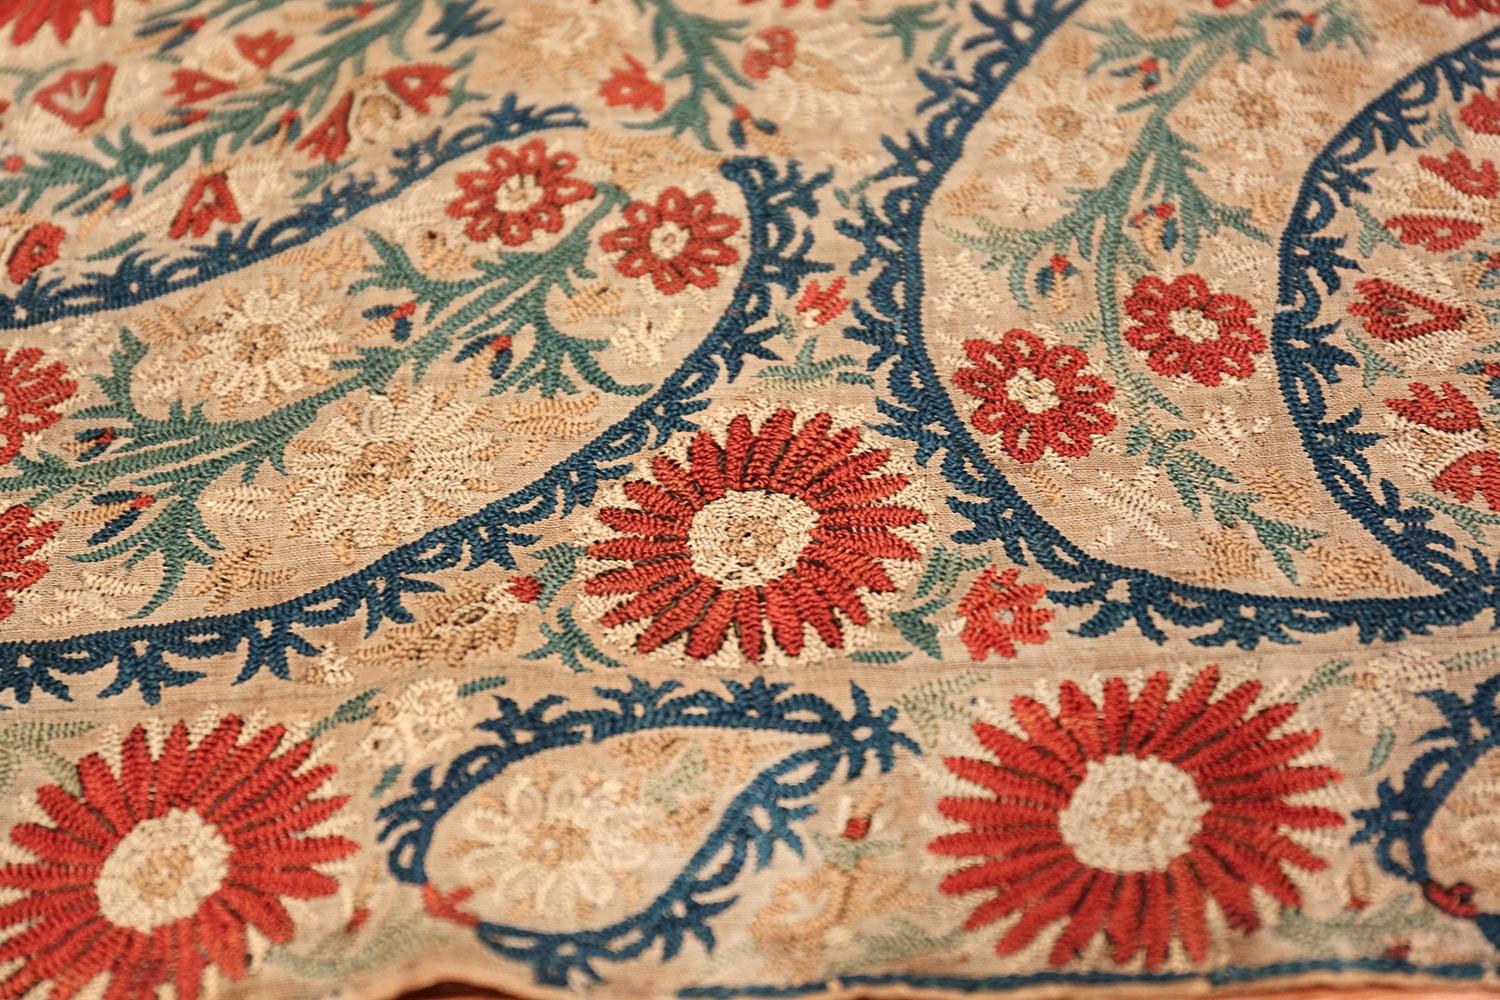 Other Refined Yet Rustic Antique Ottoman Textile Embroidery 3'2